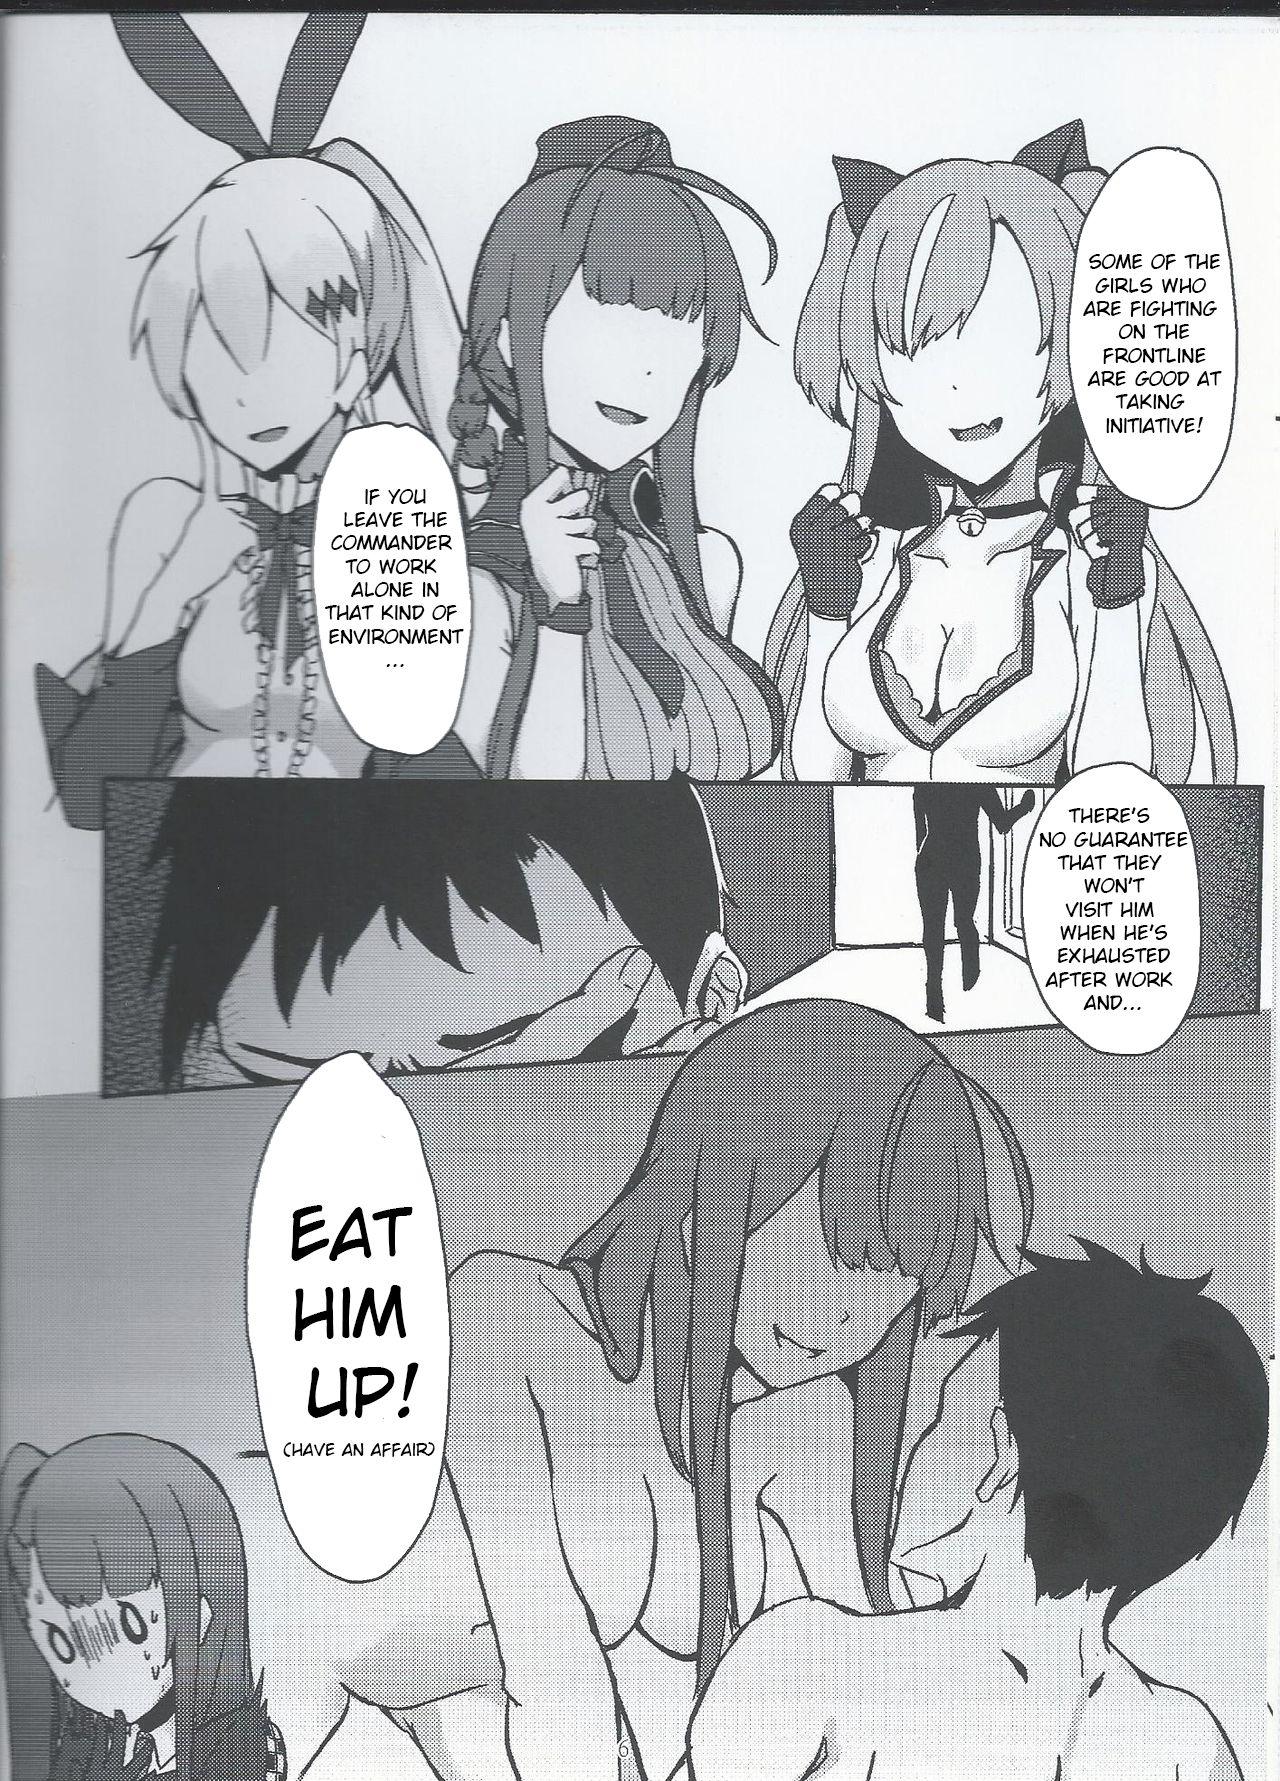 I don't know what to title this book, but anyway it's about WA2000 4